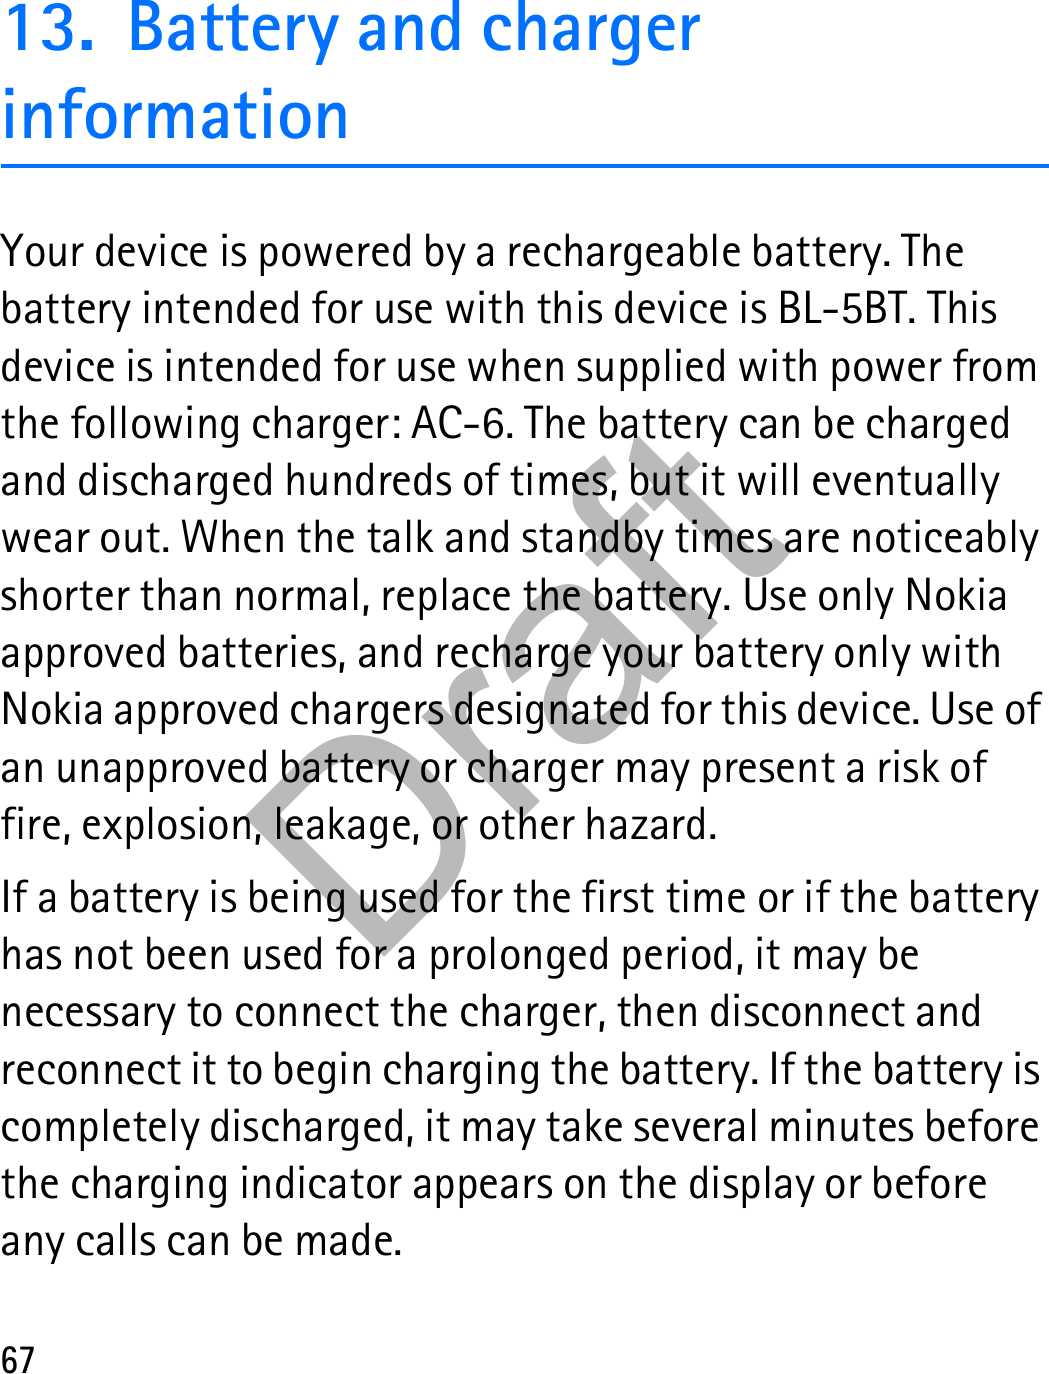 6713. Battery and charger informationYour device is powered by a rechargeable battery. The battery intended for use with this device is BL-5BT. This device is intended for use when supplied with power from the following charger: AC-6. The battery can be charged and discharged hundreds of times, but it will eventually wear out. When the talk and standby times are noticeably shorter than normal, replace the battery. Use only Nokia approved batteries, and recharge your battery only with Nokia approved chargers designated for this device. Use of an unapproved battery or charger may present a risk of fire, explosion, leakage, or other hazard.If a battery is being used for the first time or if the battery has not been used for a prolonged period, it may be necessary to connect the charger, then disconnect and reconnect it to begin charging the battery. If the battery is completely discharged, it may take several minutes before the charging indicator appears on the display or before any calls can be made.Draft